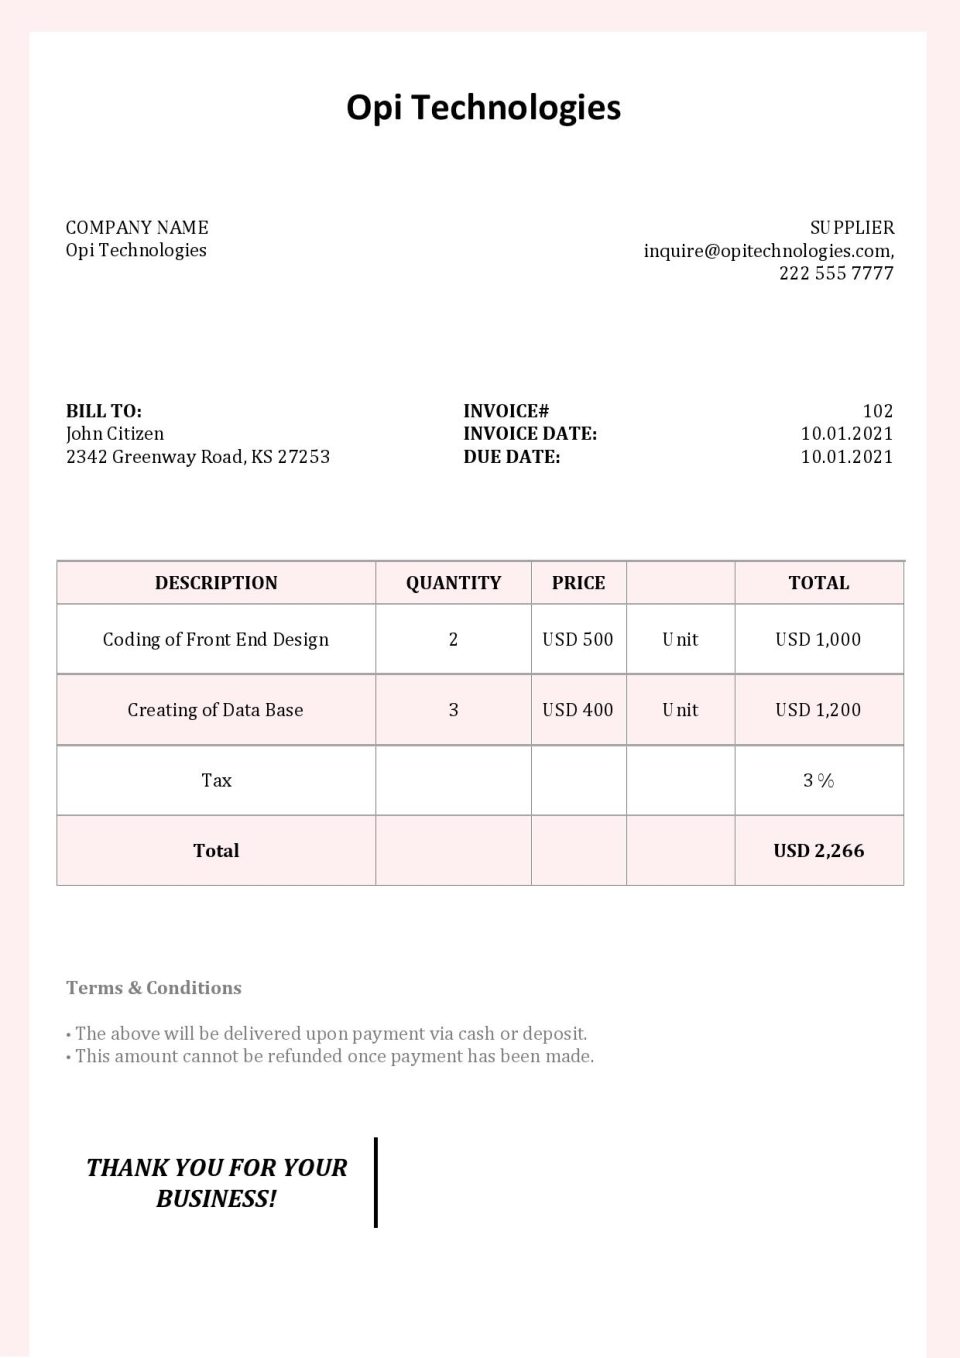 USA Opi Technologies invoice template in Word and PDF format, fully editable